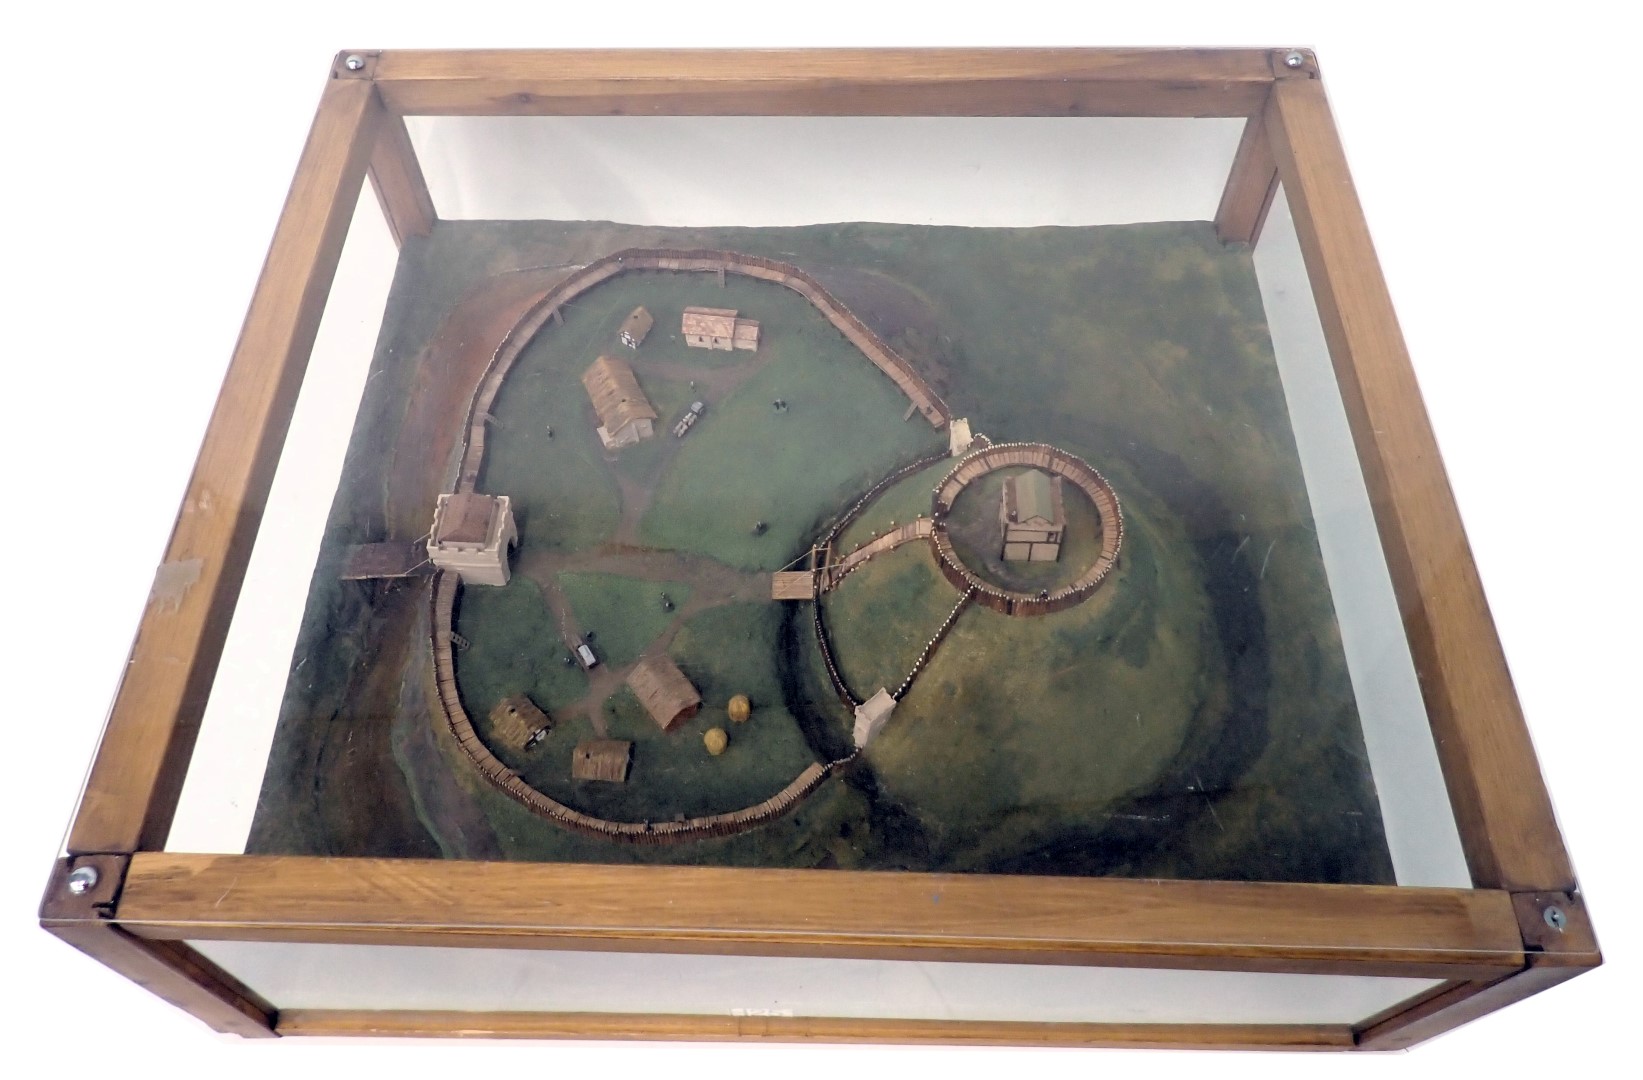 A diorama model of Tickhill Castle, showing the wooden fortification and some surrounding landscape